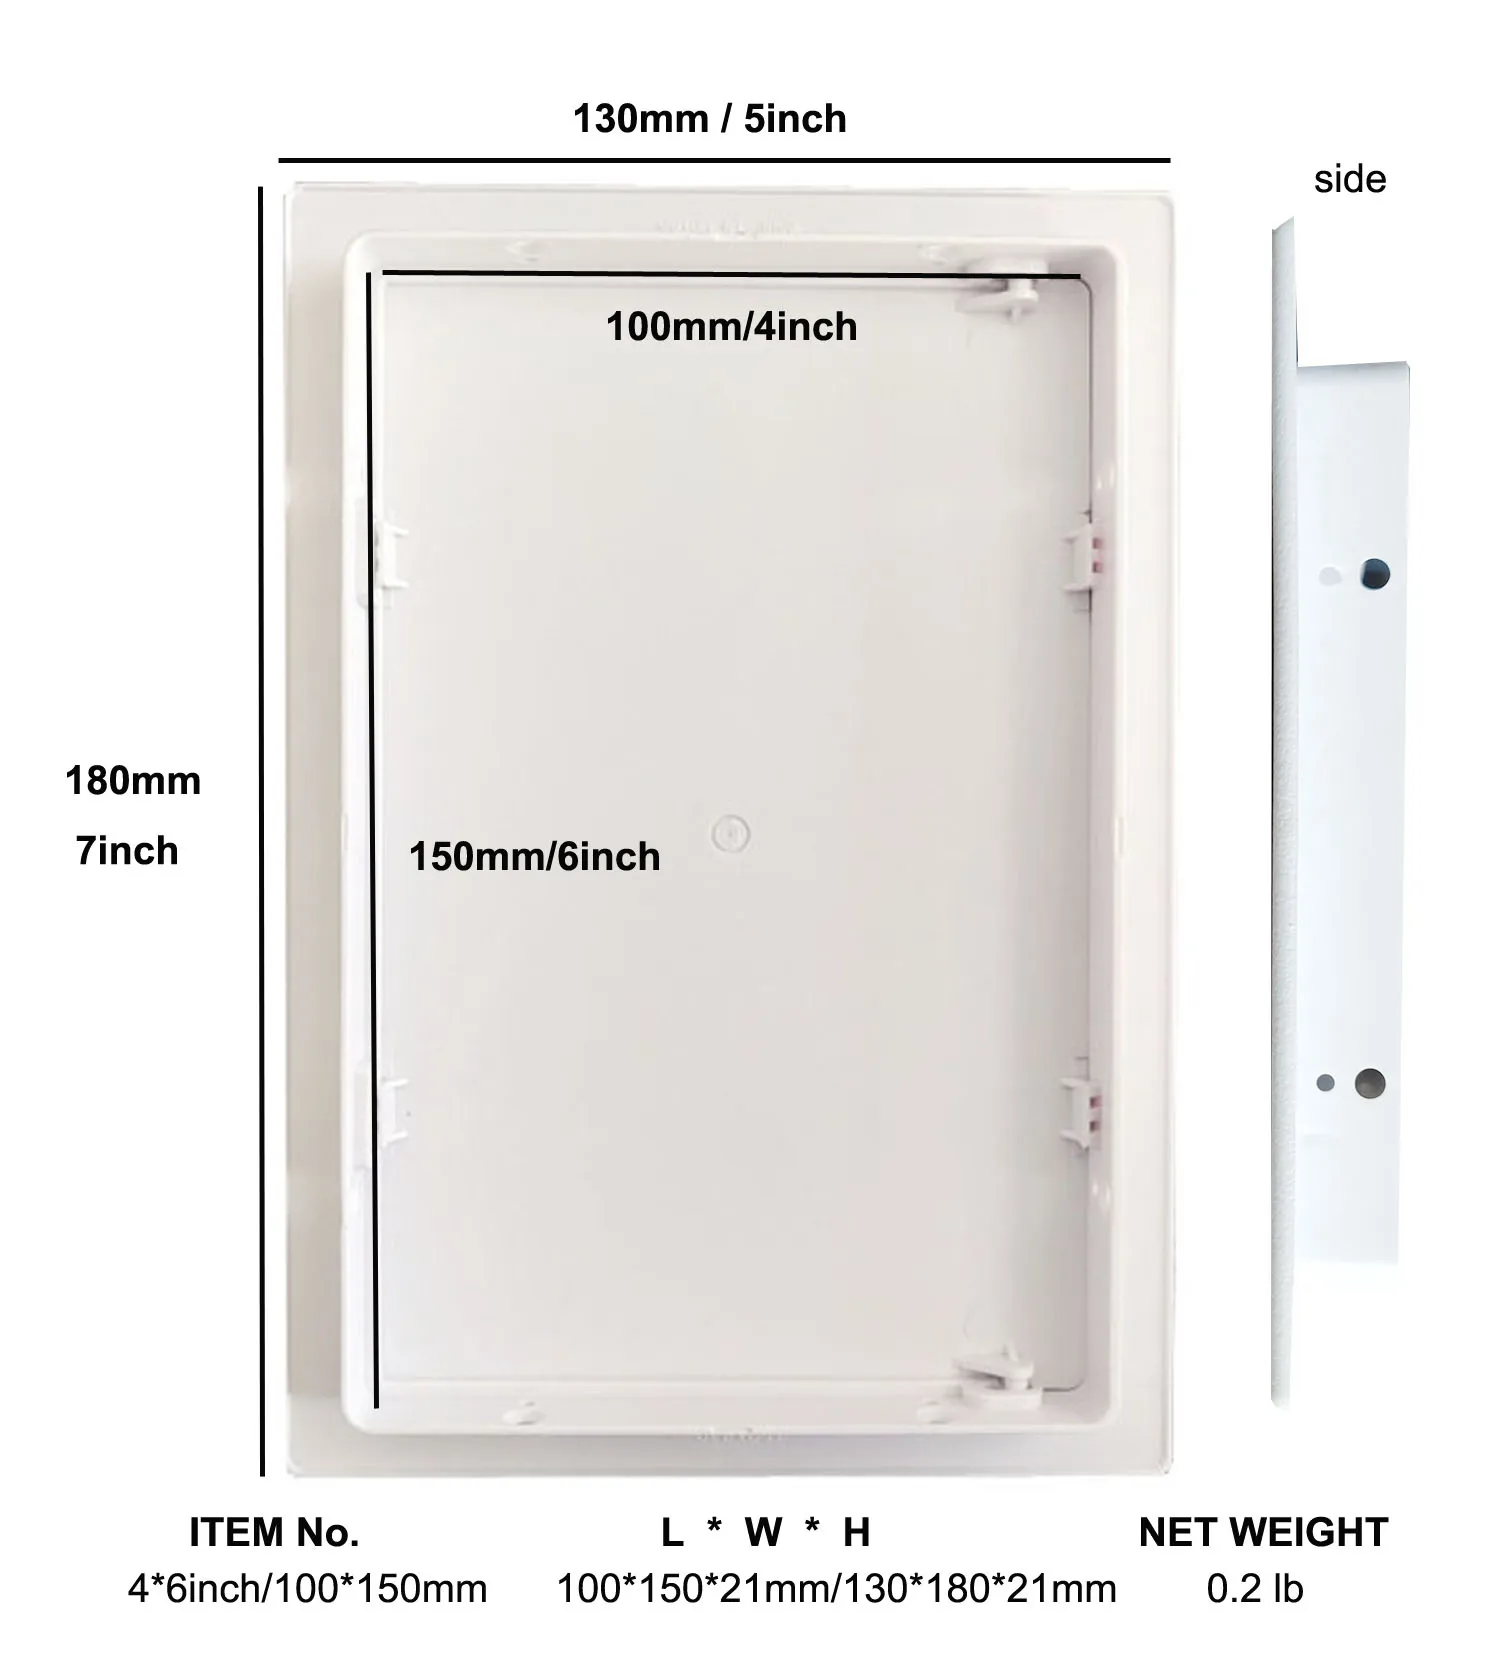 Boomerangg Access Panel High-Grade ABS Plastic Inspection Hatch- Plasterboard & Fuse Box Cover Cabinet-Conceals Wires 150x150 Fits Flush to Surfaces Pipes & More Meters